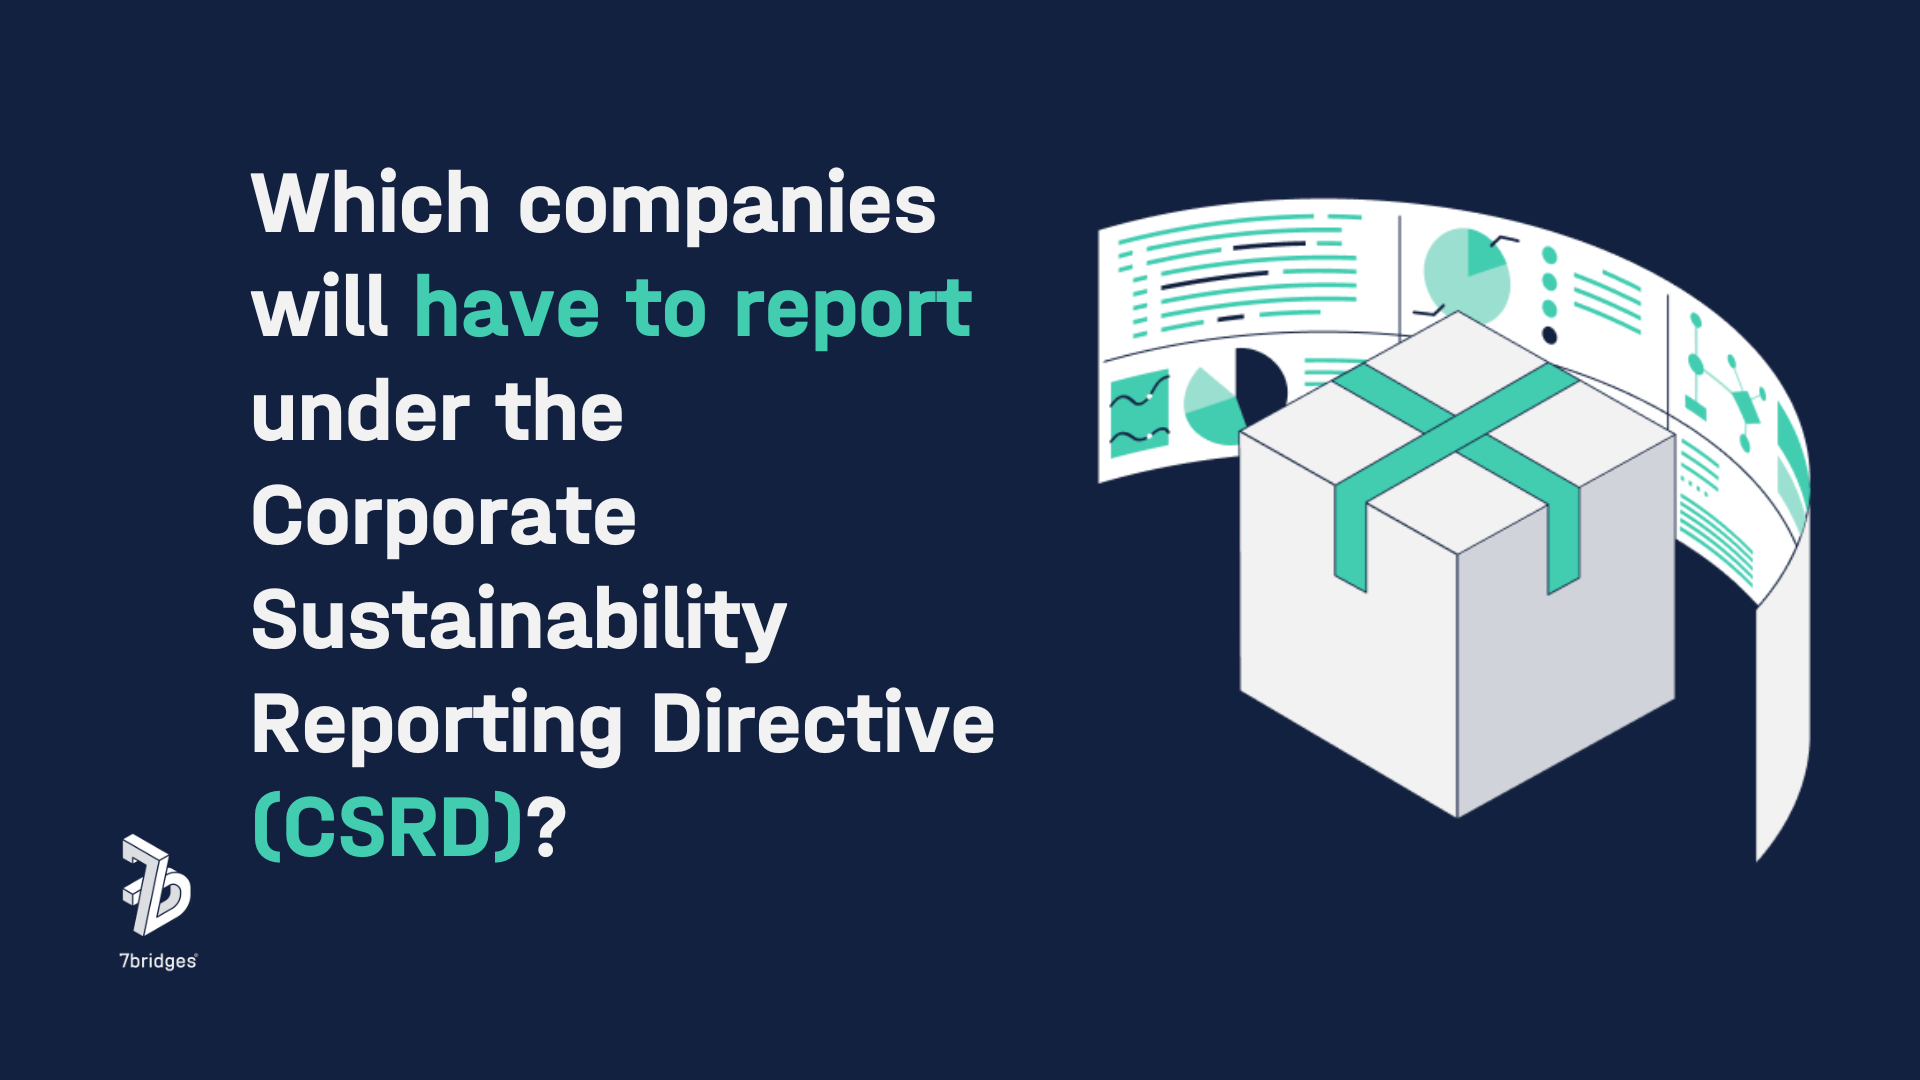 Blog title about which companies need to report under CSRD, to the right there is a shipping box surrounded by a curved screen full of data on a dark blue background